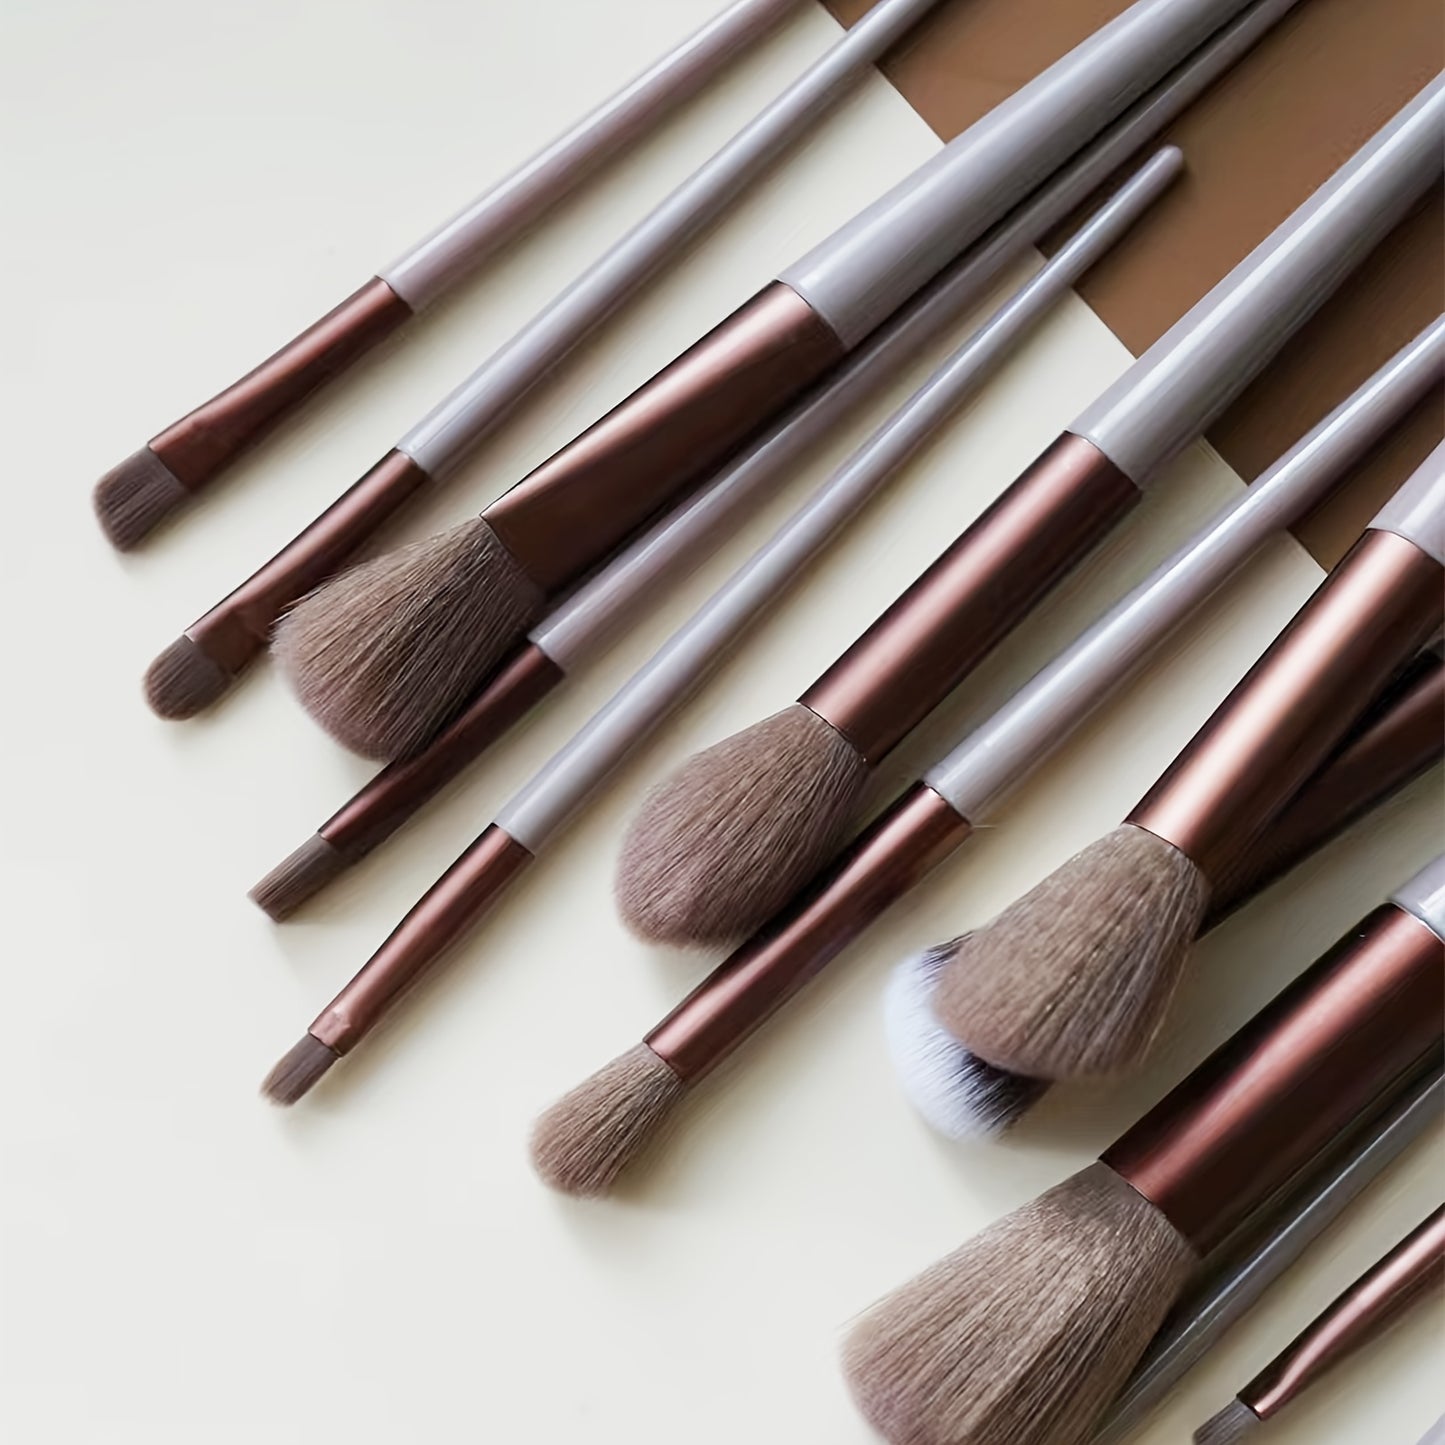 13-Piece Professional Makeup Brush Set: Essential Tools for Eyeshadow, Blush, and More